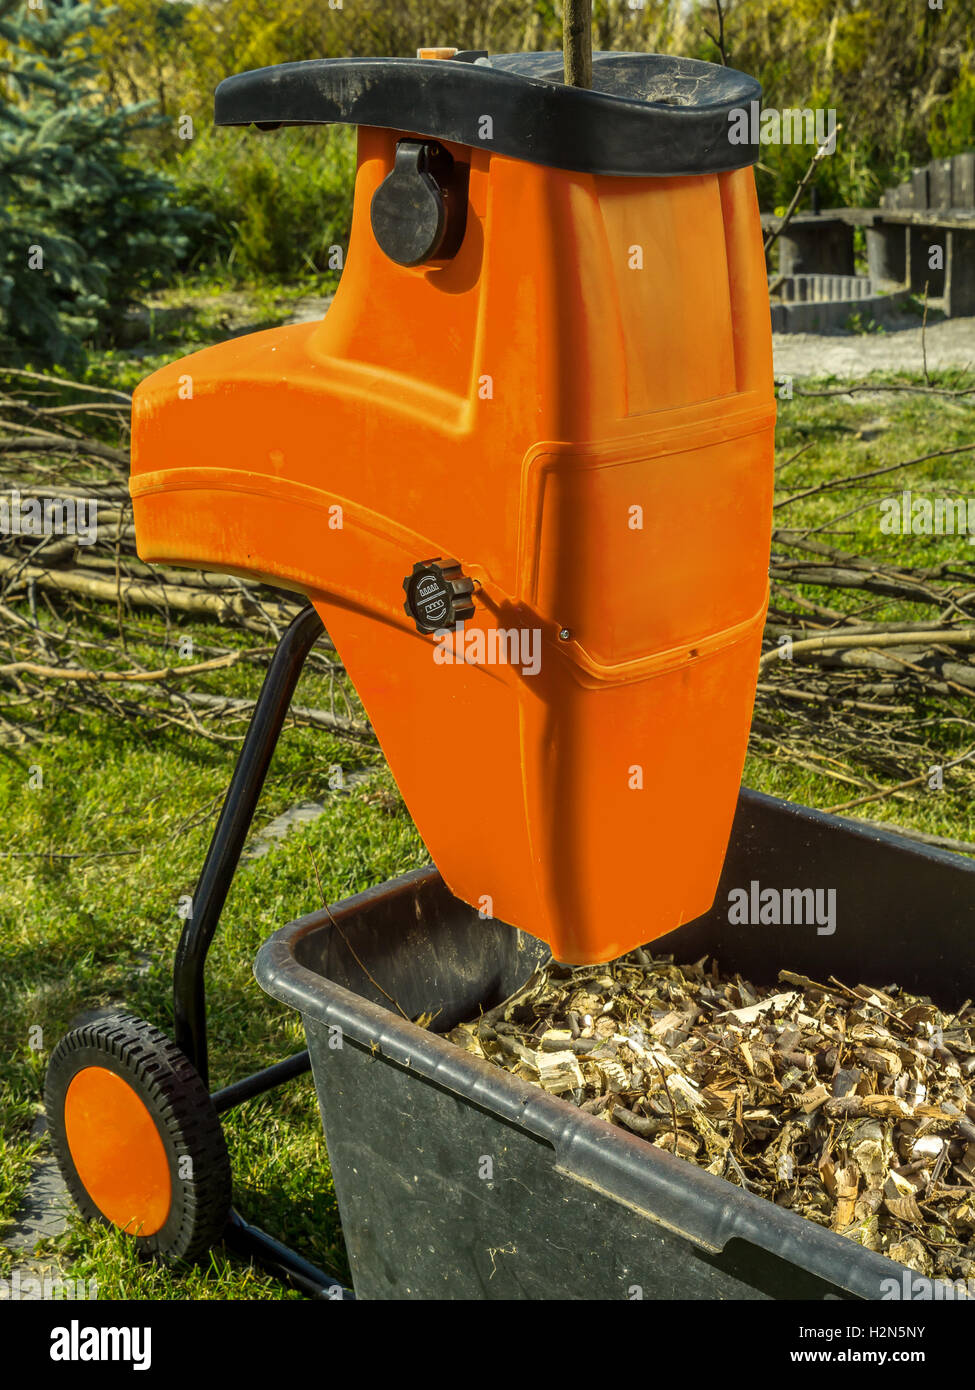 Mulching Machine High Resolution Stock Photography and Images - Alamy